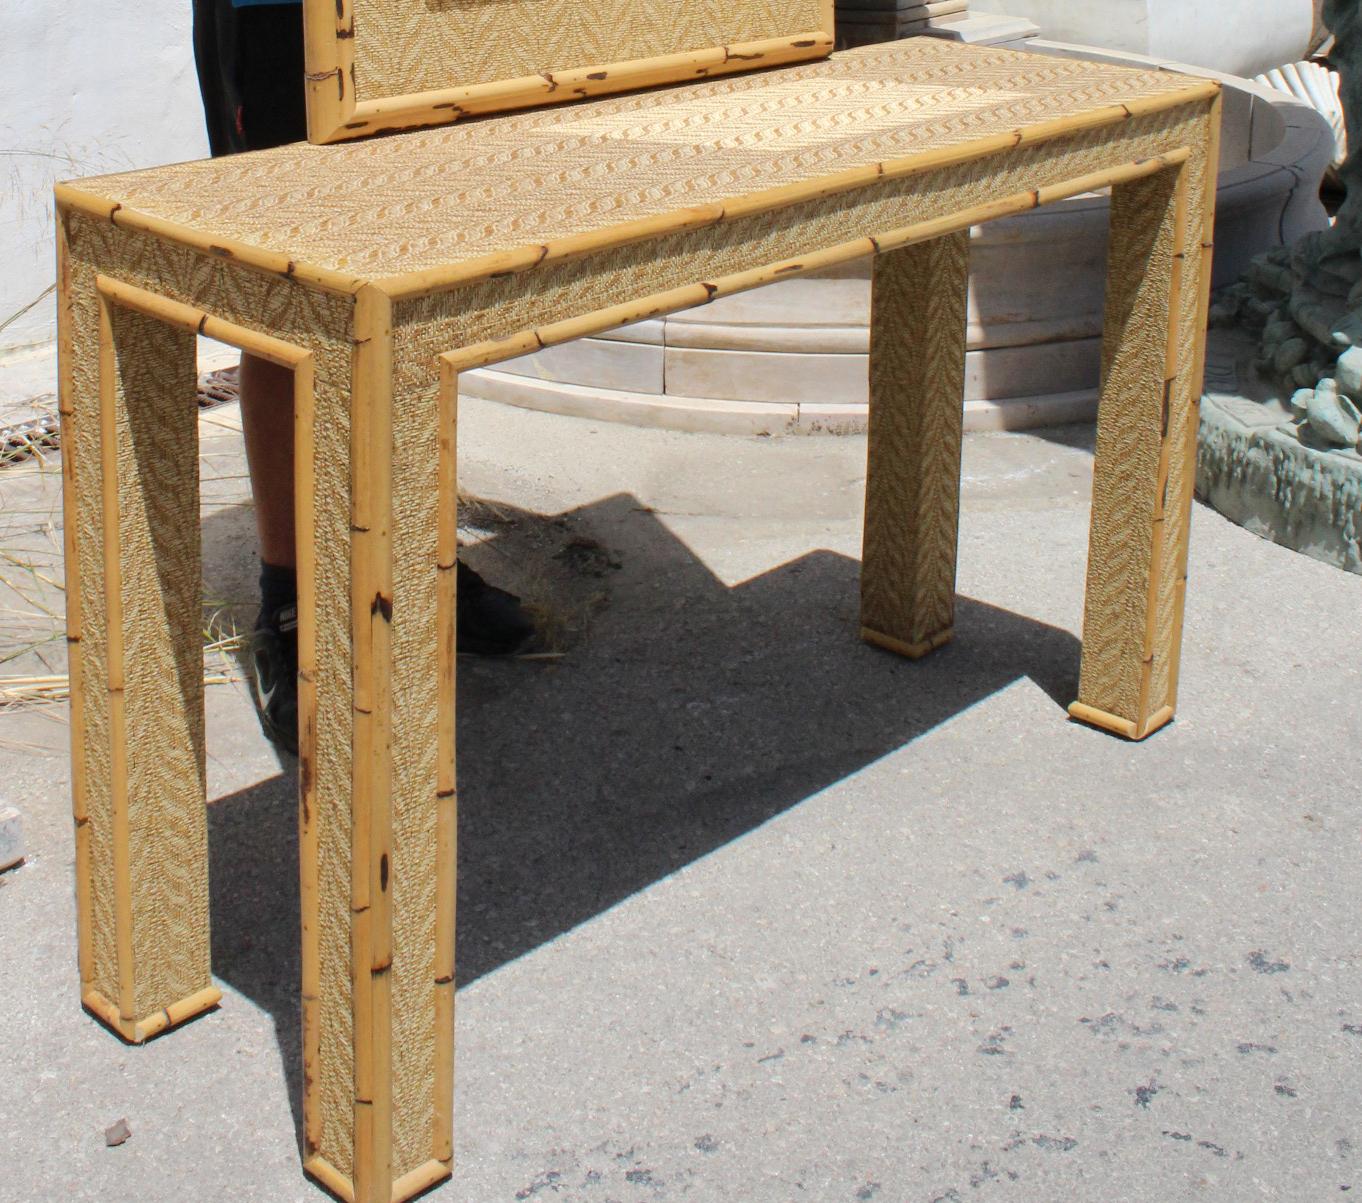 1980s bamboo and rattan console table with mirror set. 

Mirror measurements: 105 x 73cm.
 